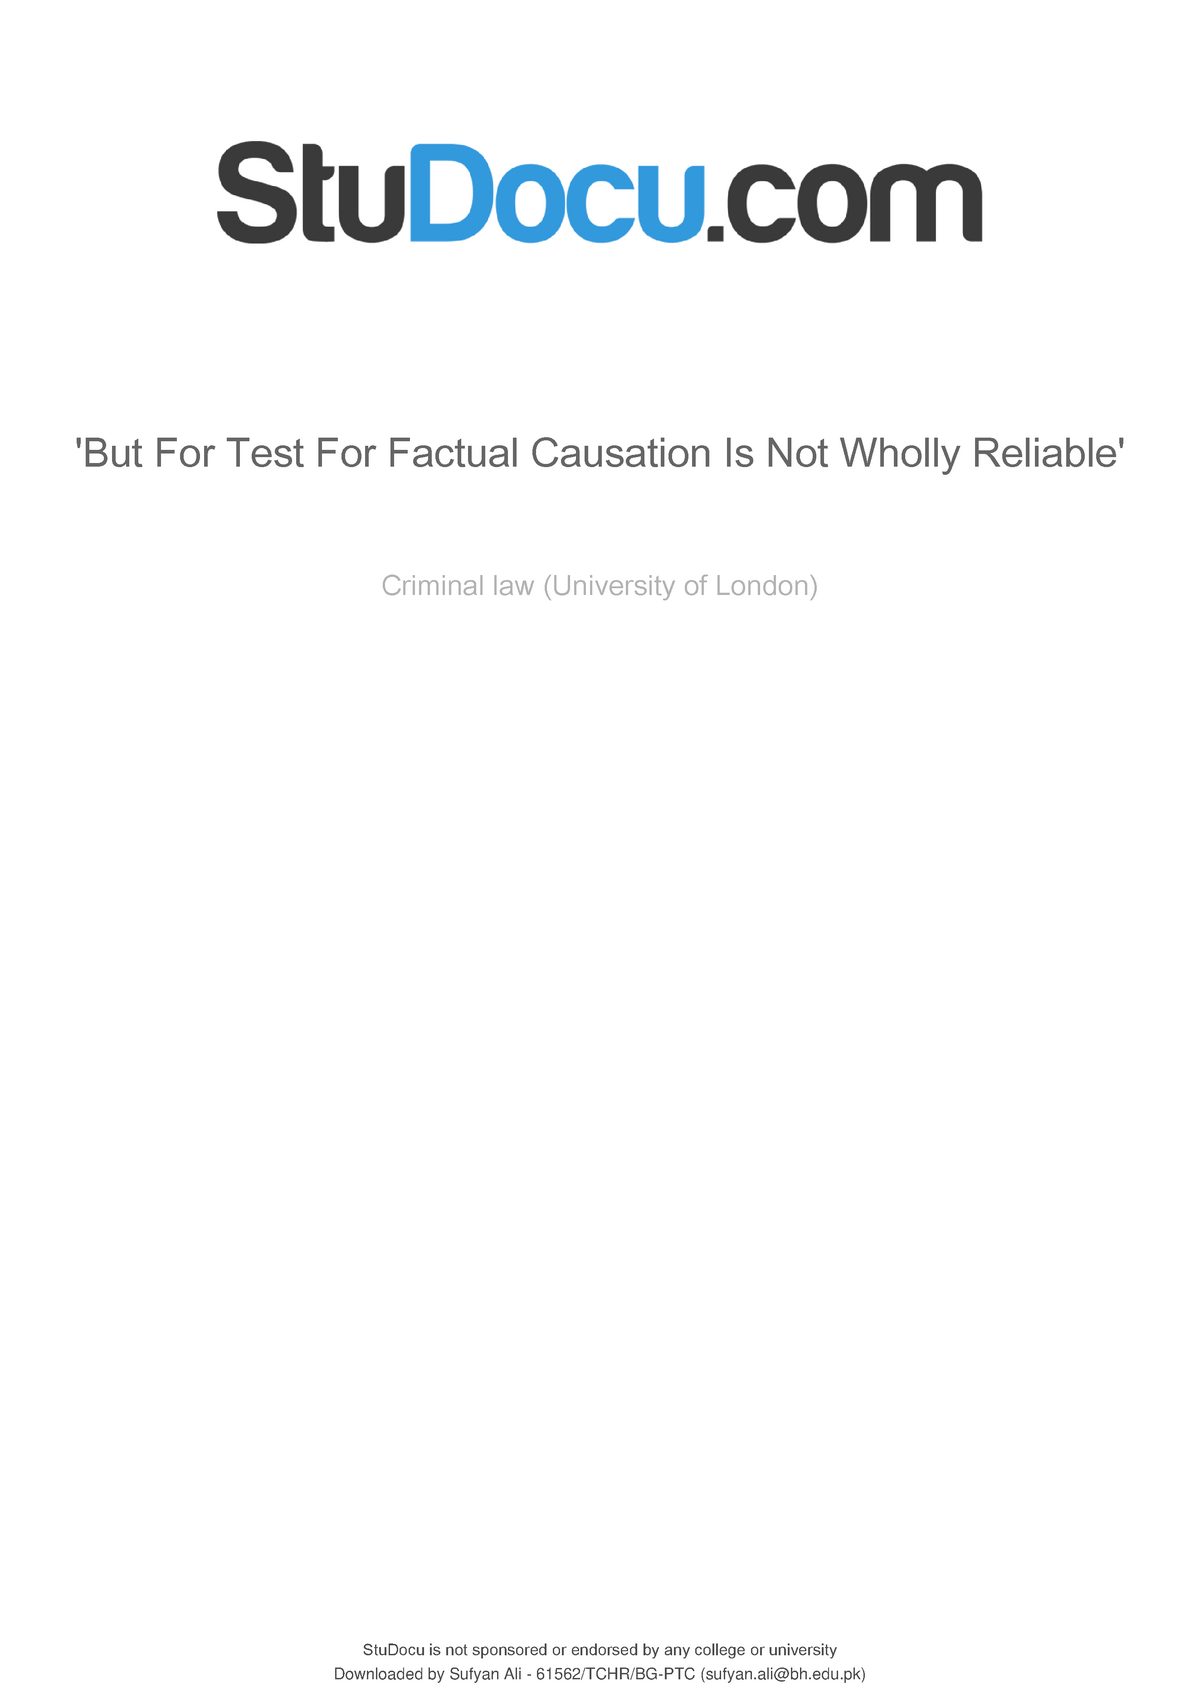 what is the test for factual causation